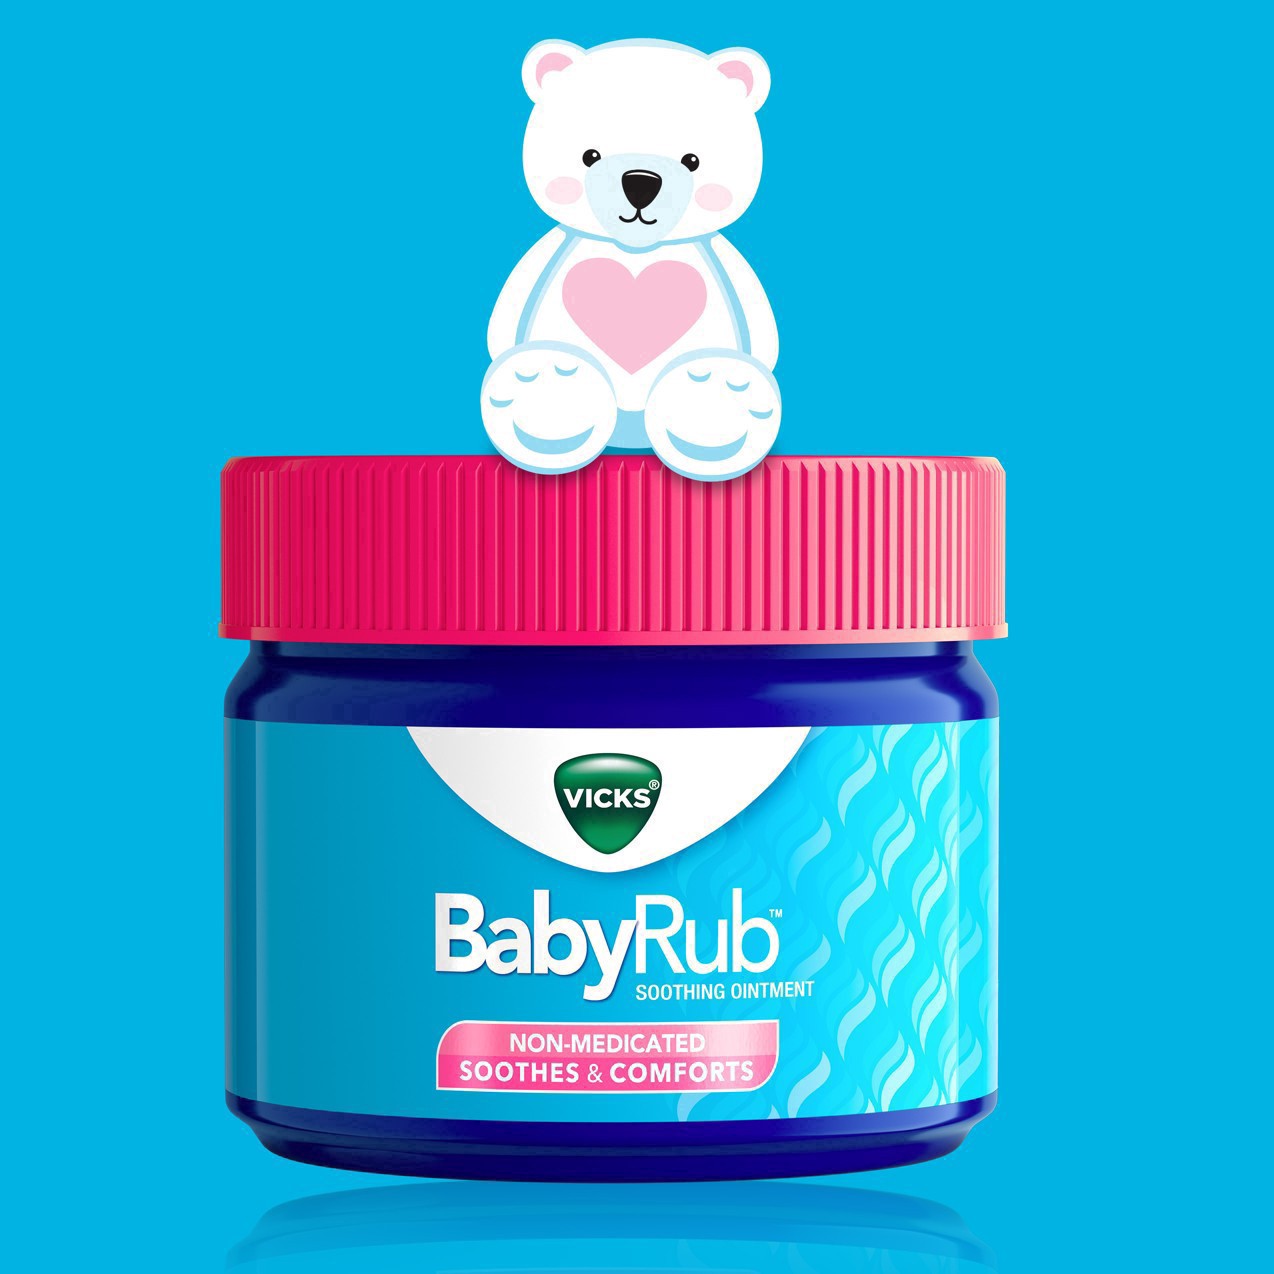 slide 35 of 78, Vicks BabyRub, Chest Rub Ointment with Soothing Aloe, Eucalyptus, Lavender, and Rosemary, from The Makers of VapoRub, 1.76 oz, 1.76 oz